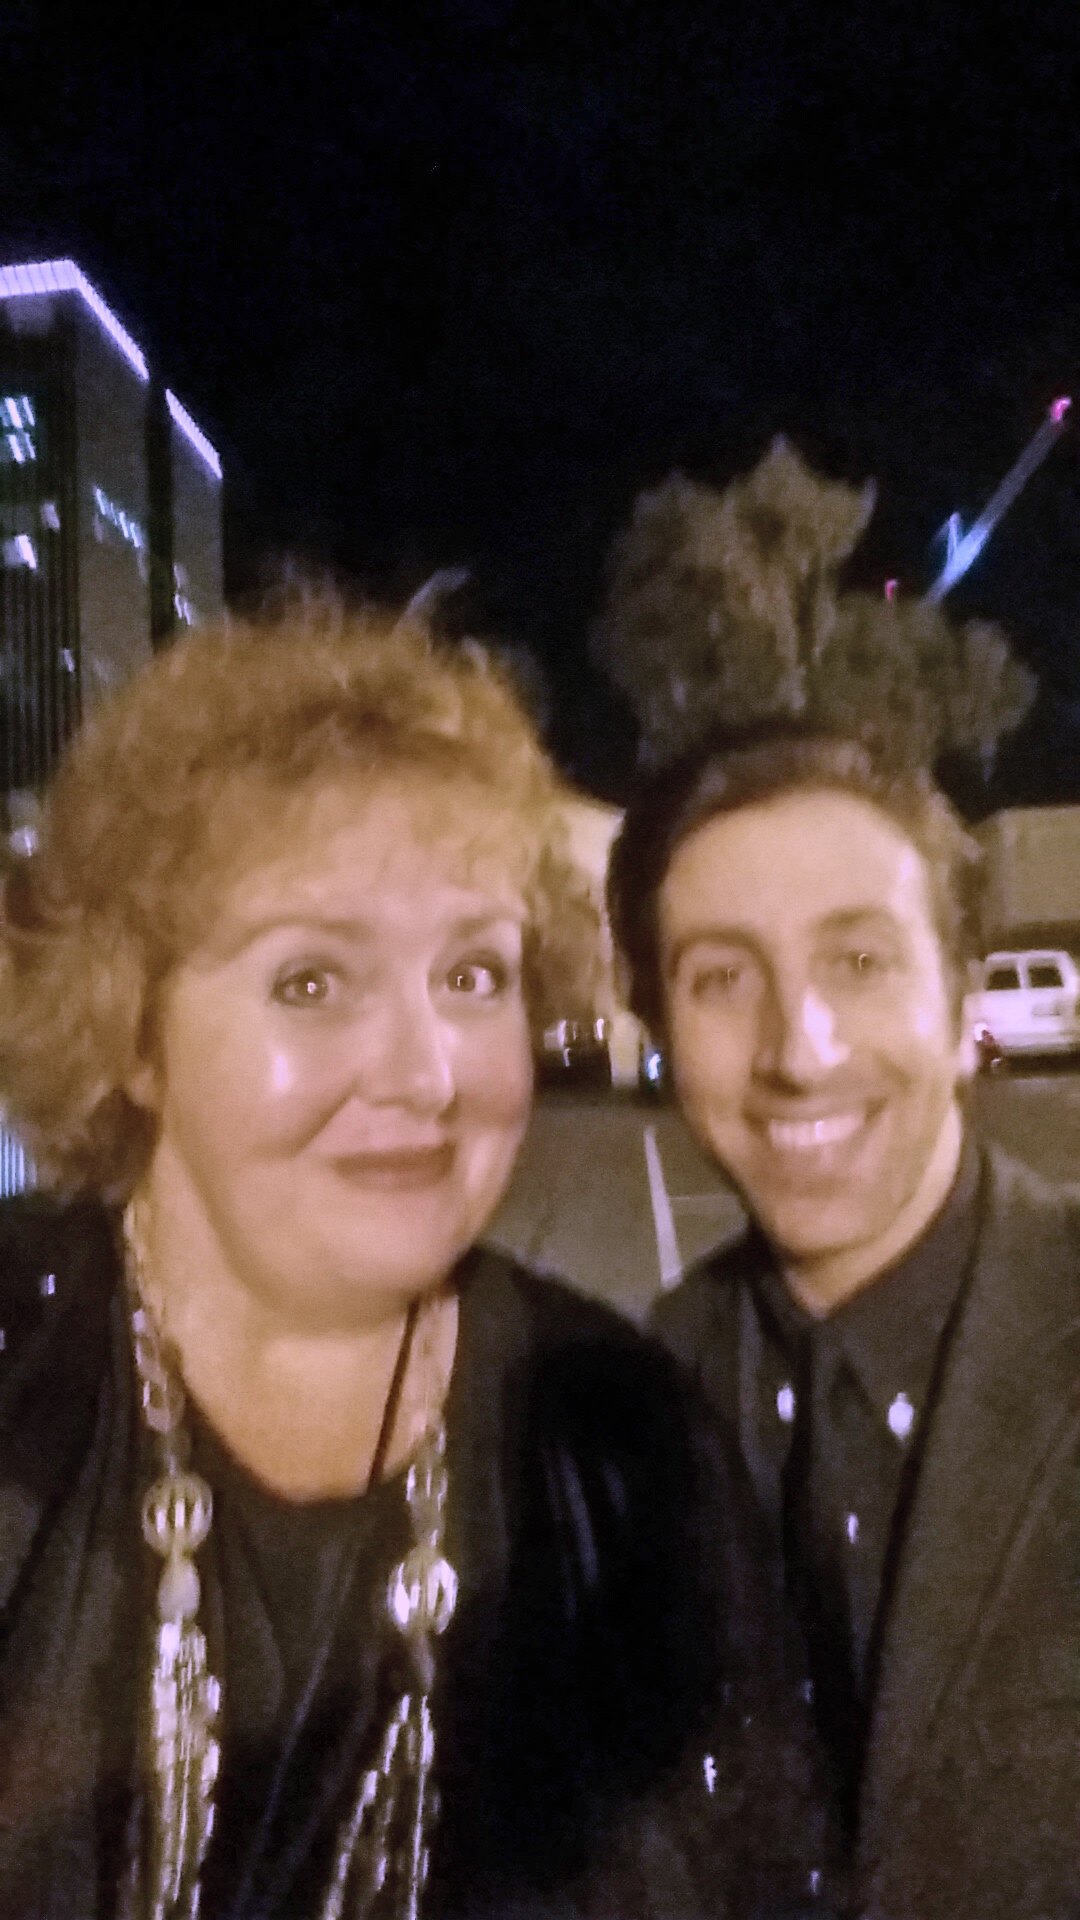 Tracy Weisert & BIG BANG's Simon Helberg at the Hollywood Film Awards, November 14, 2014. He is such a nice person!